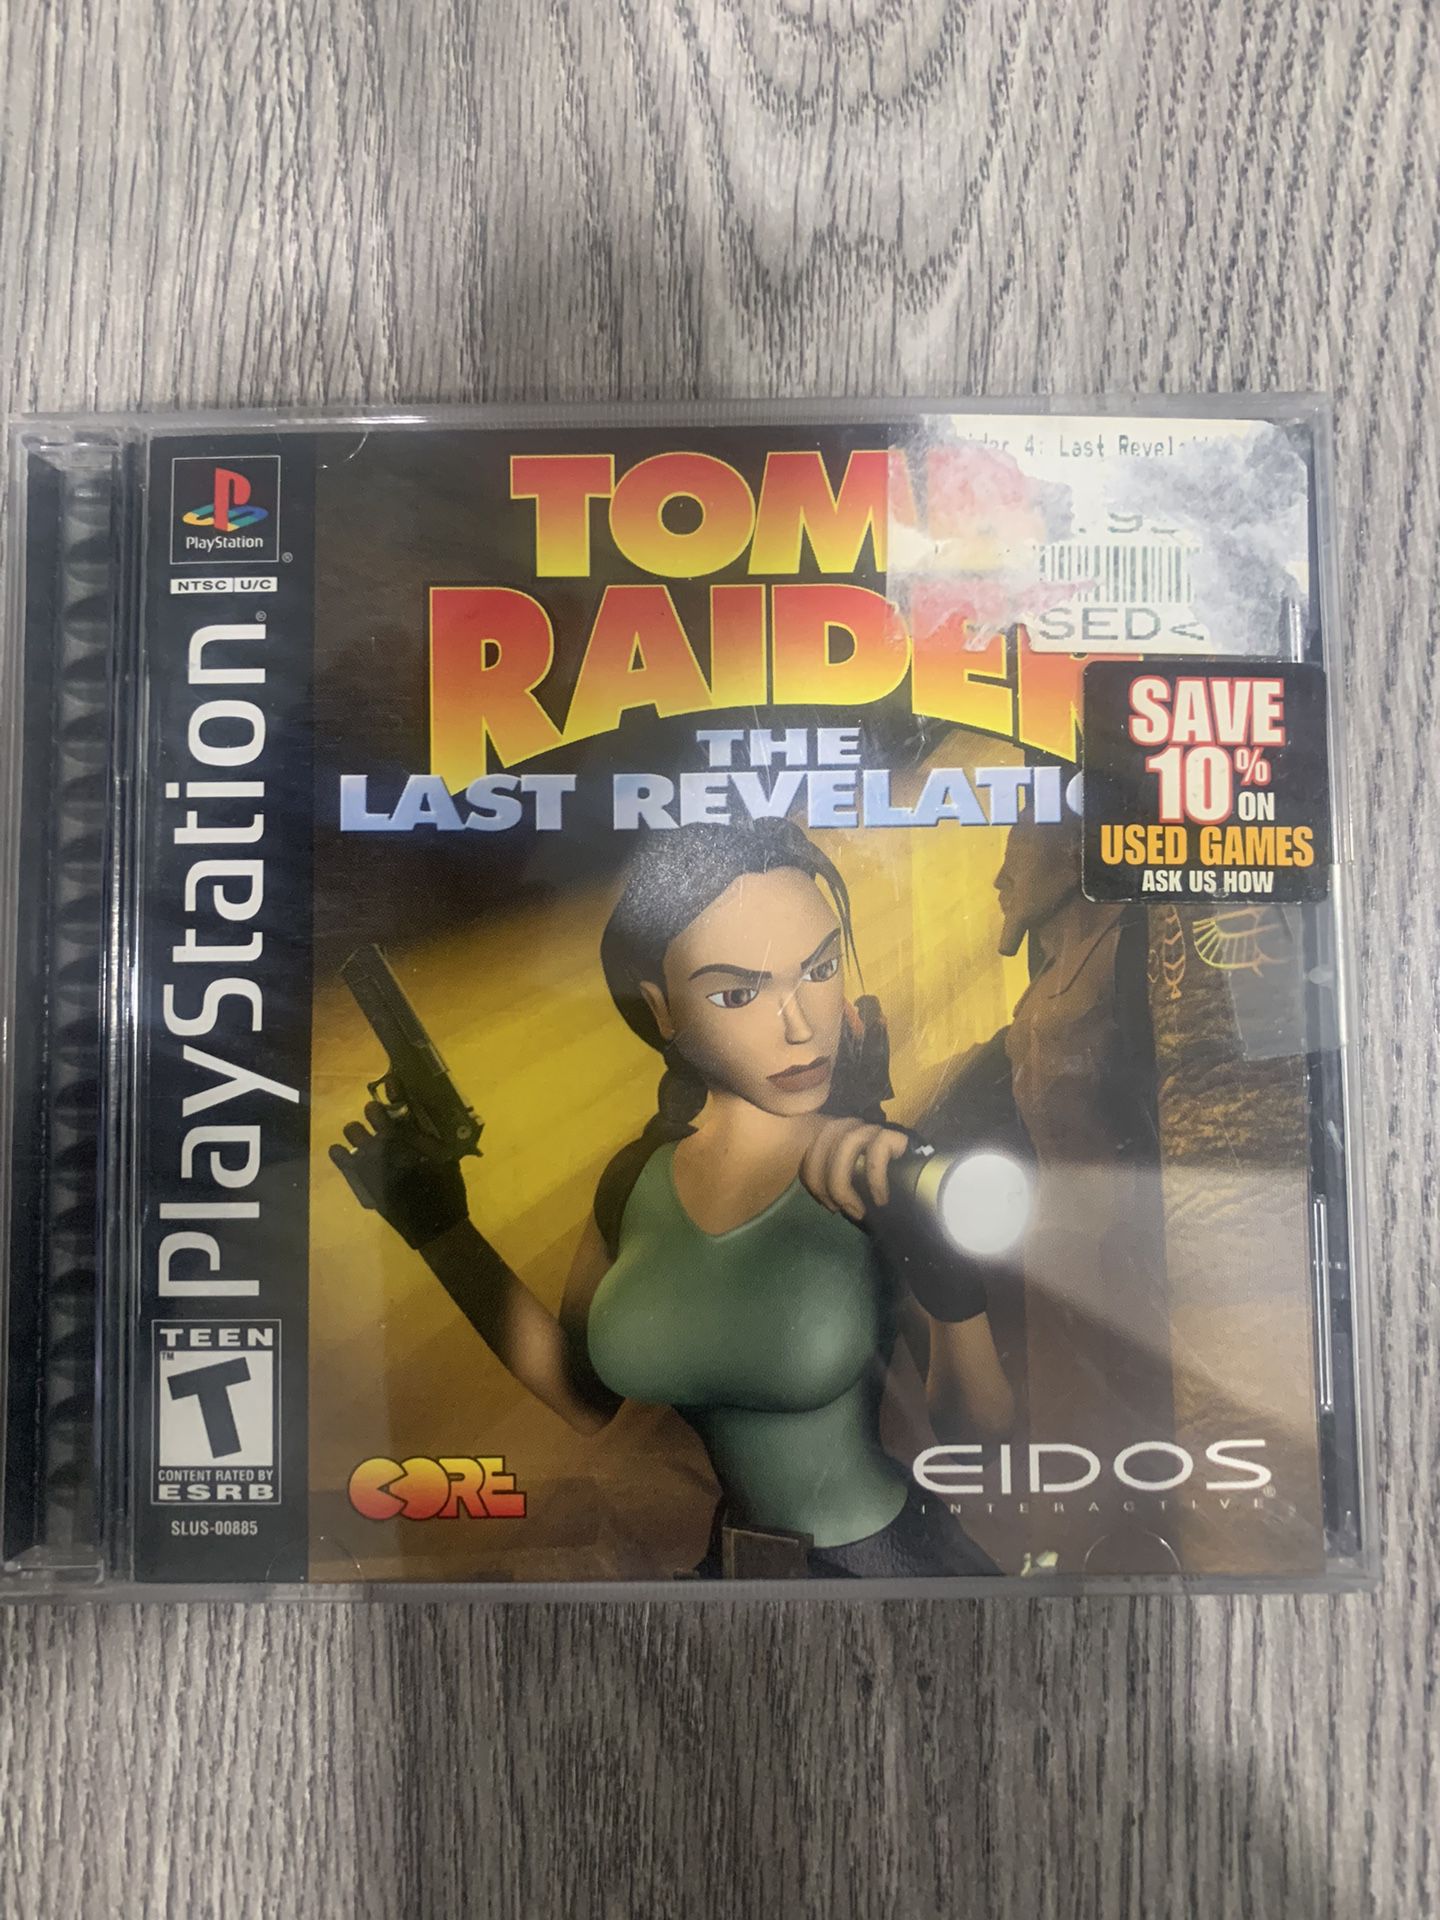 Tomb Raider The Last Revelation For PS1